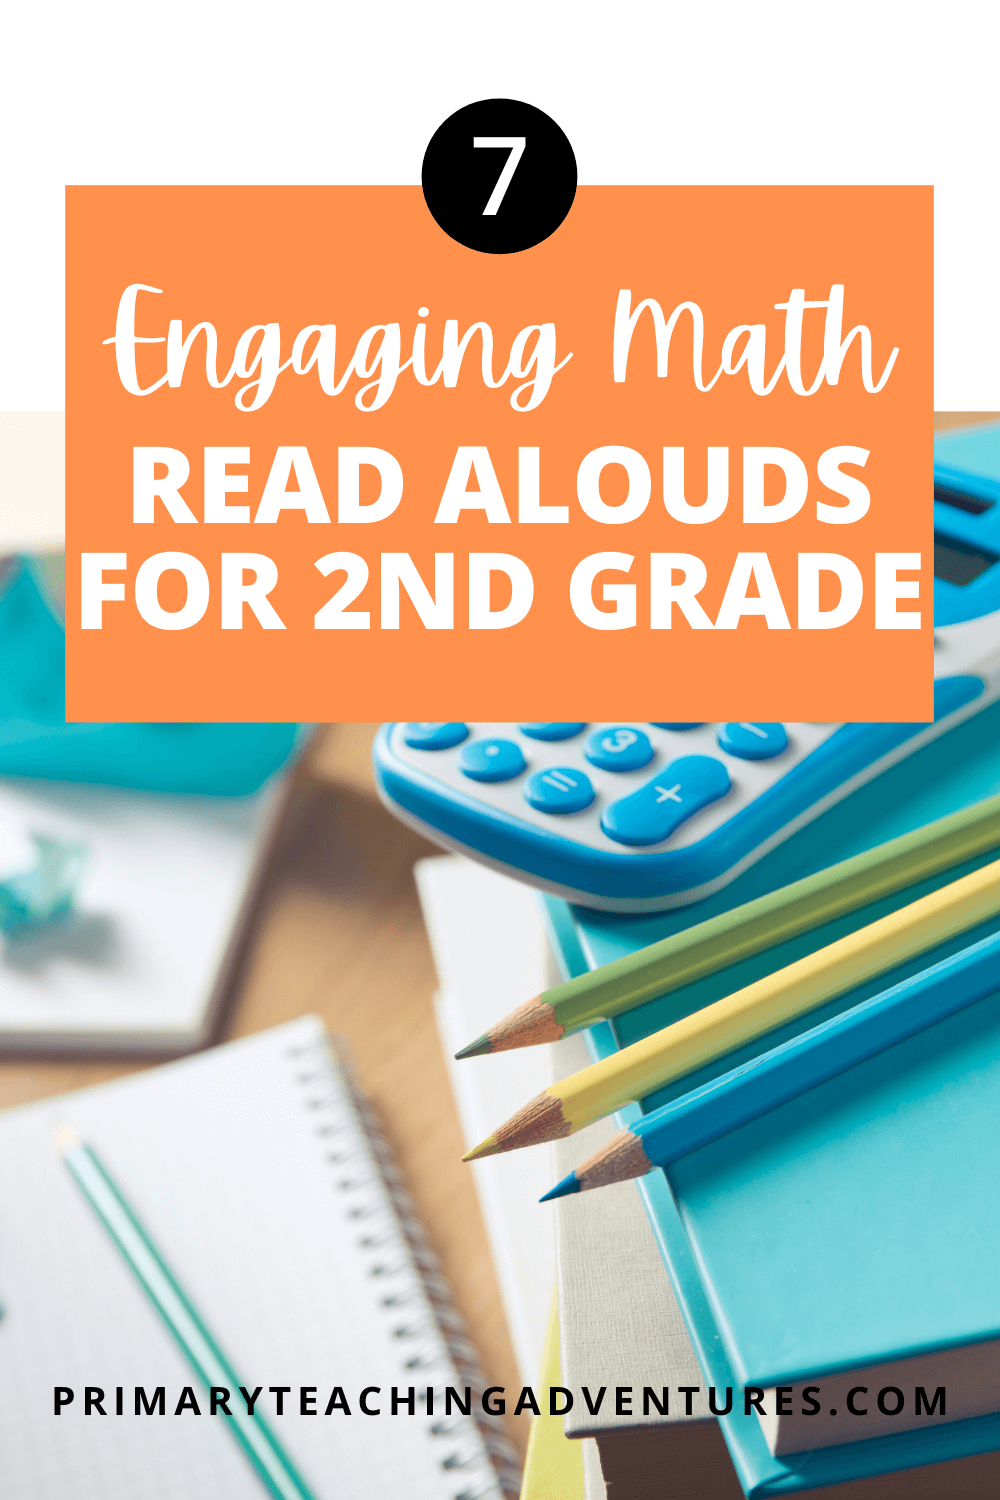 7-engaging-math-read-aloud-books-for-2nd-grade-primary-teaching